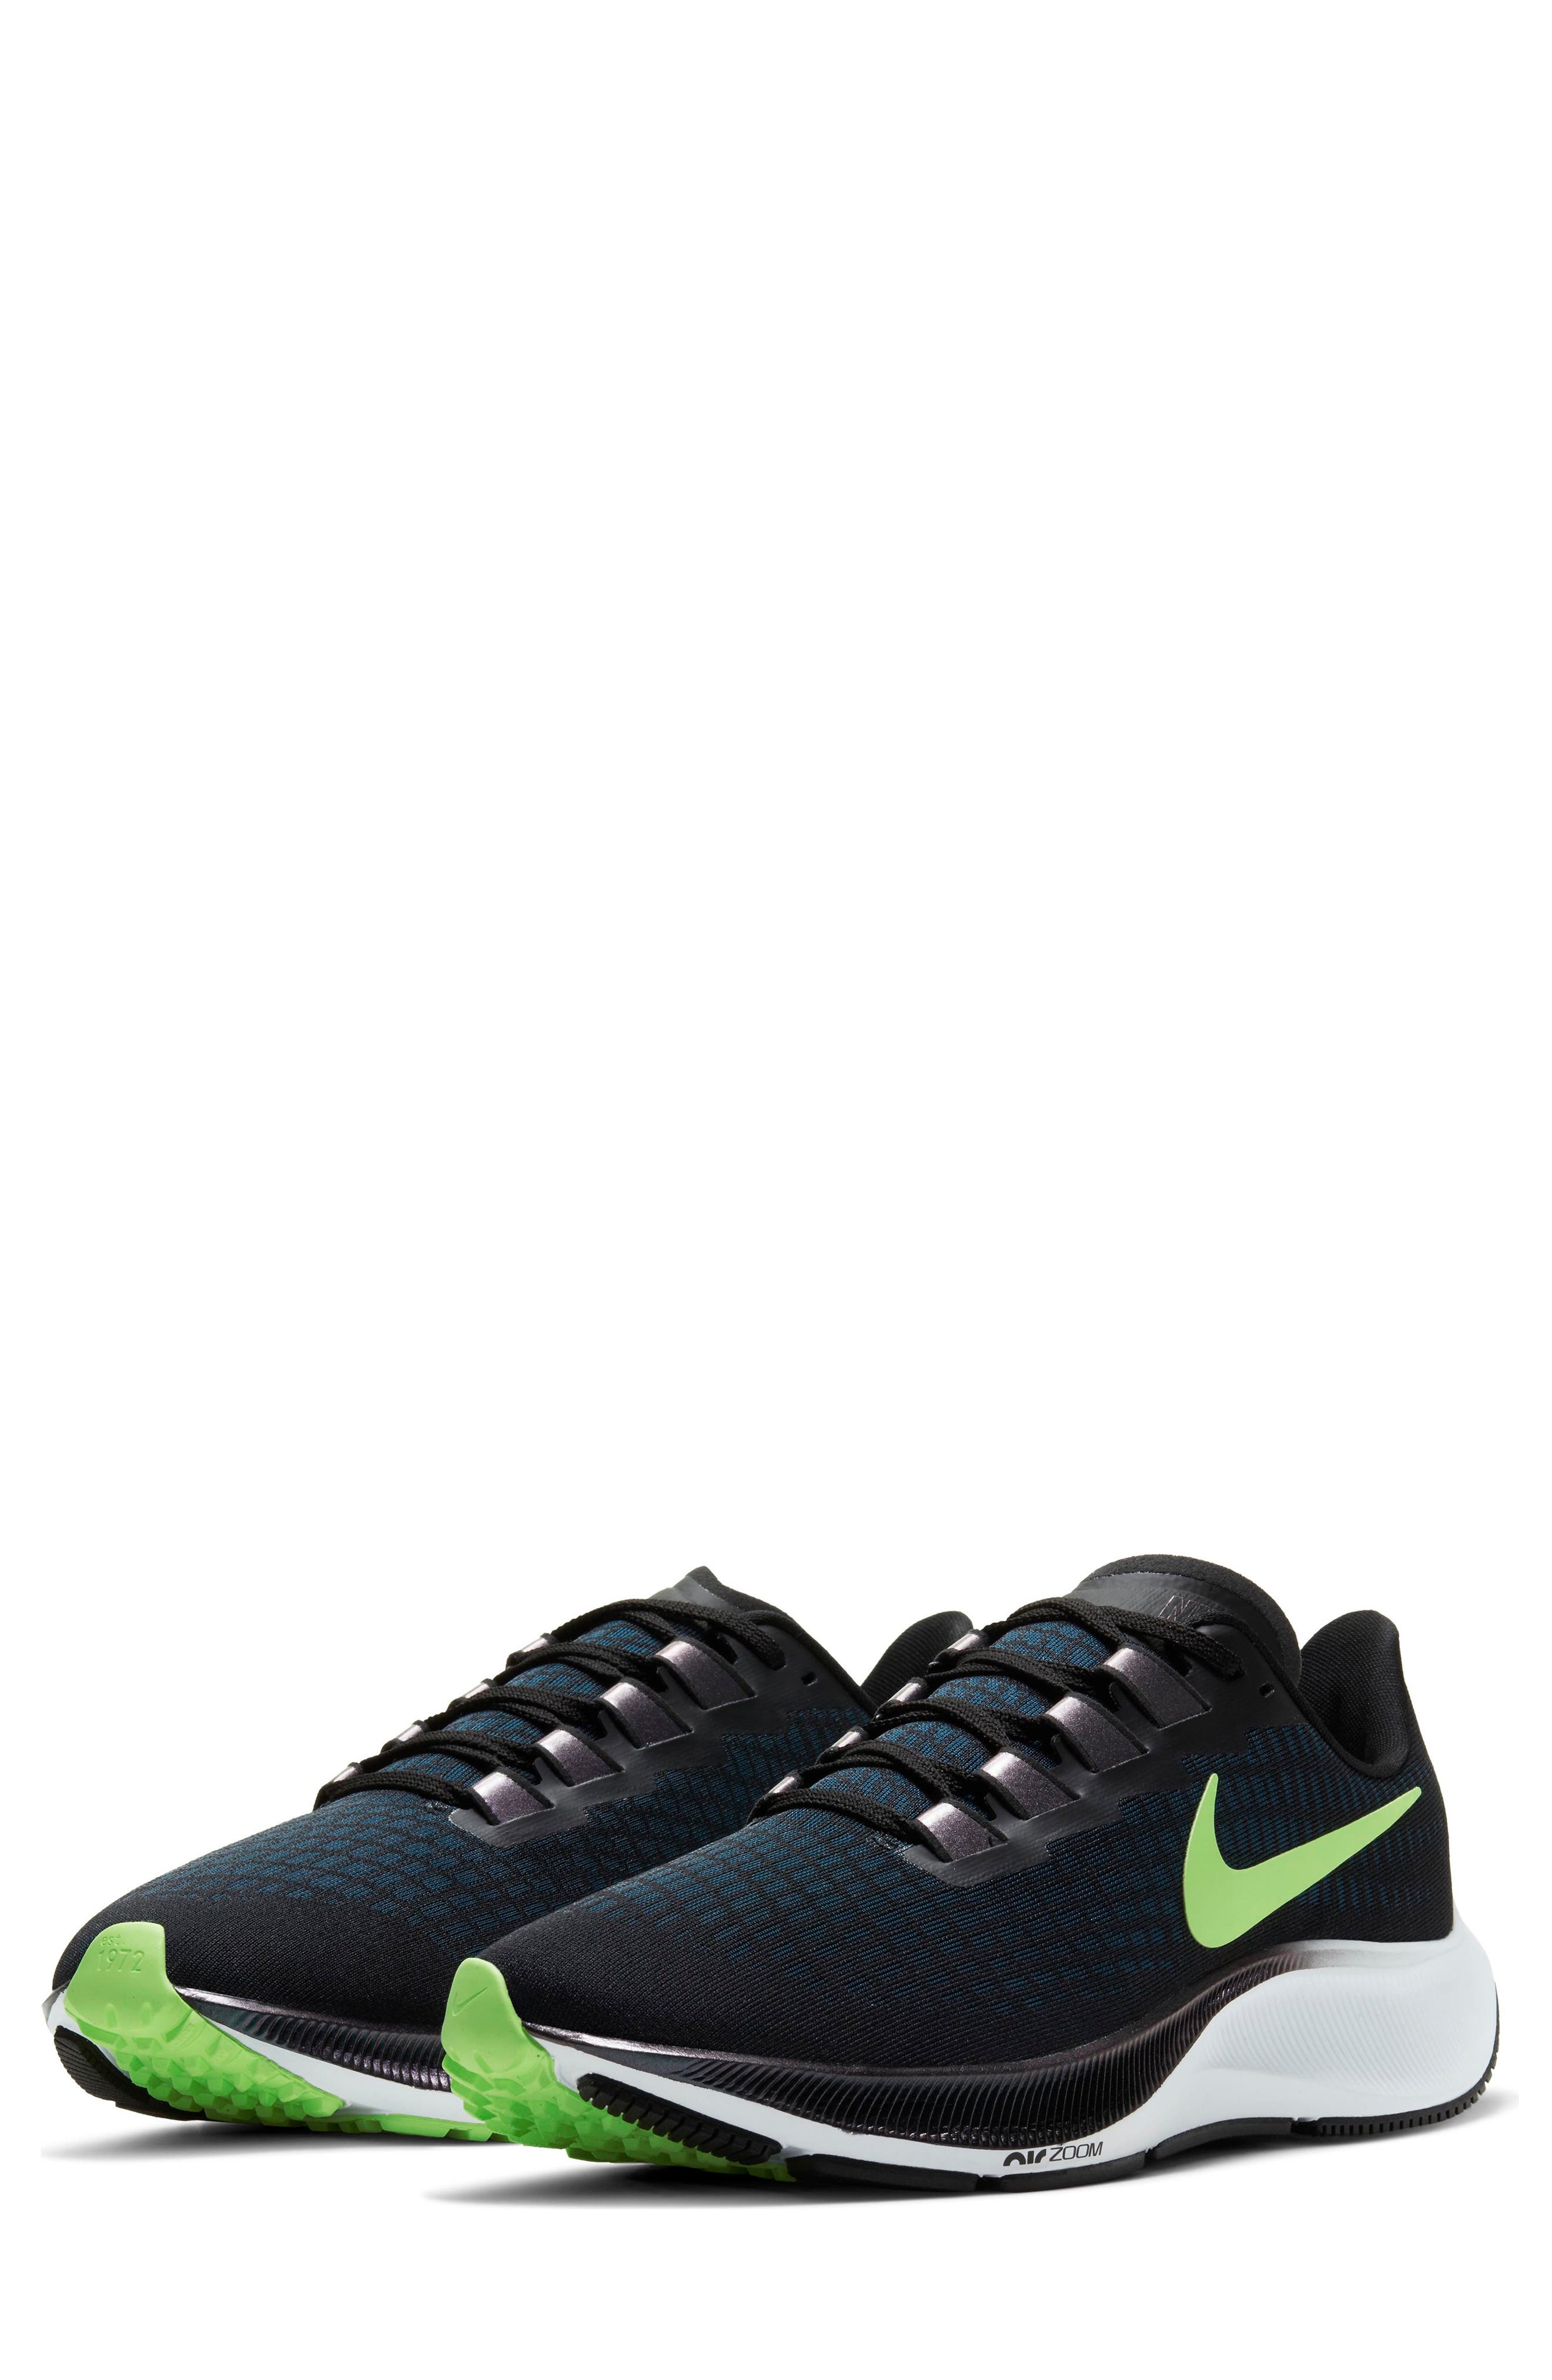 black and green nike sneakers